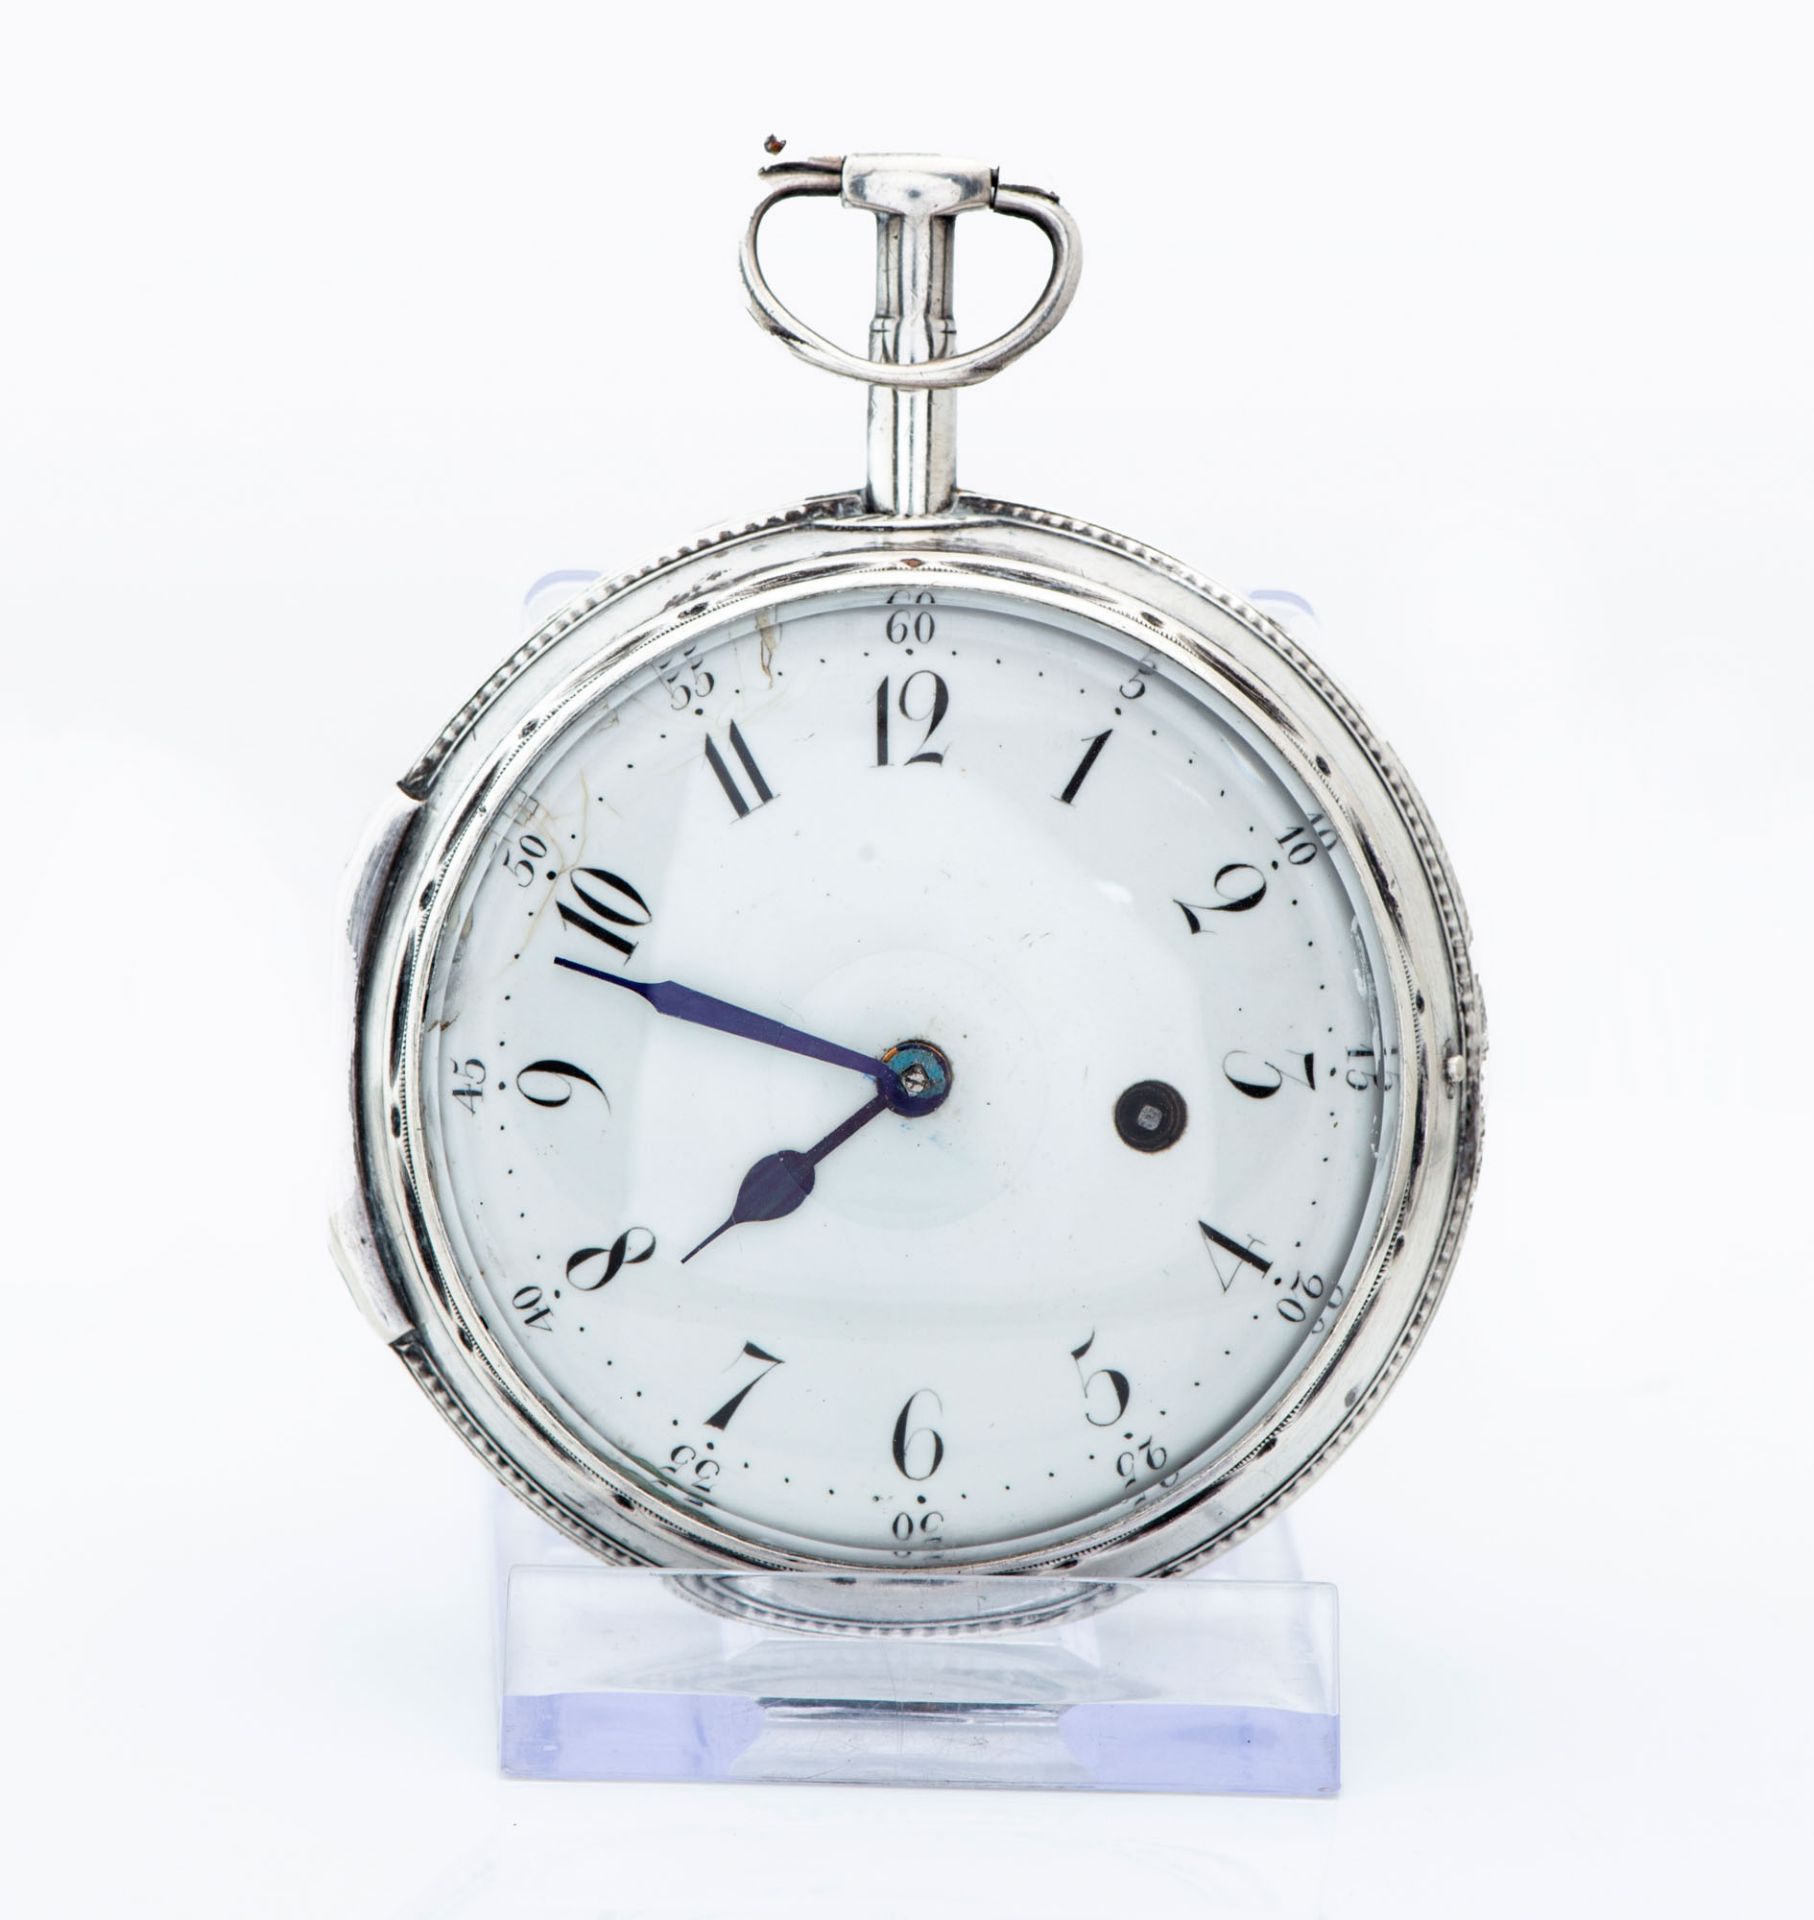 A S?lver Verge Fusee Pocket Watch by John Ward, England, London, 1784-1792